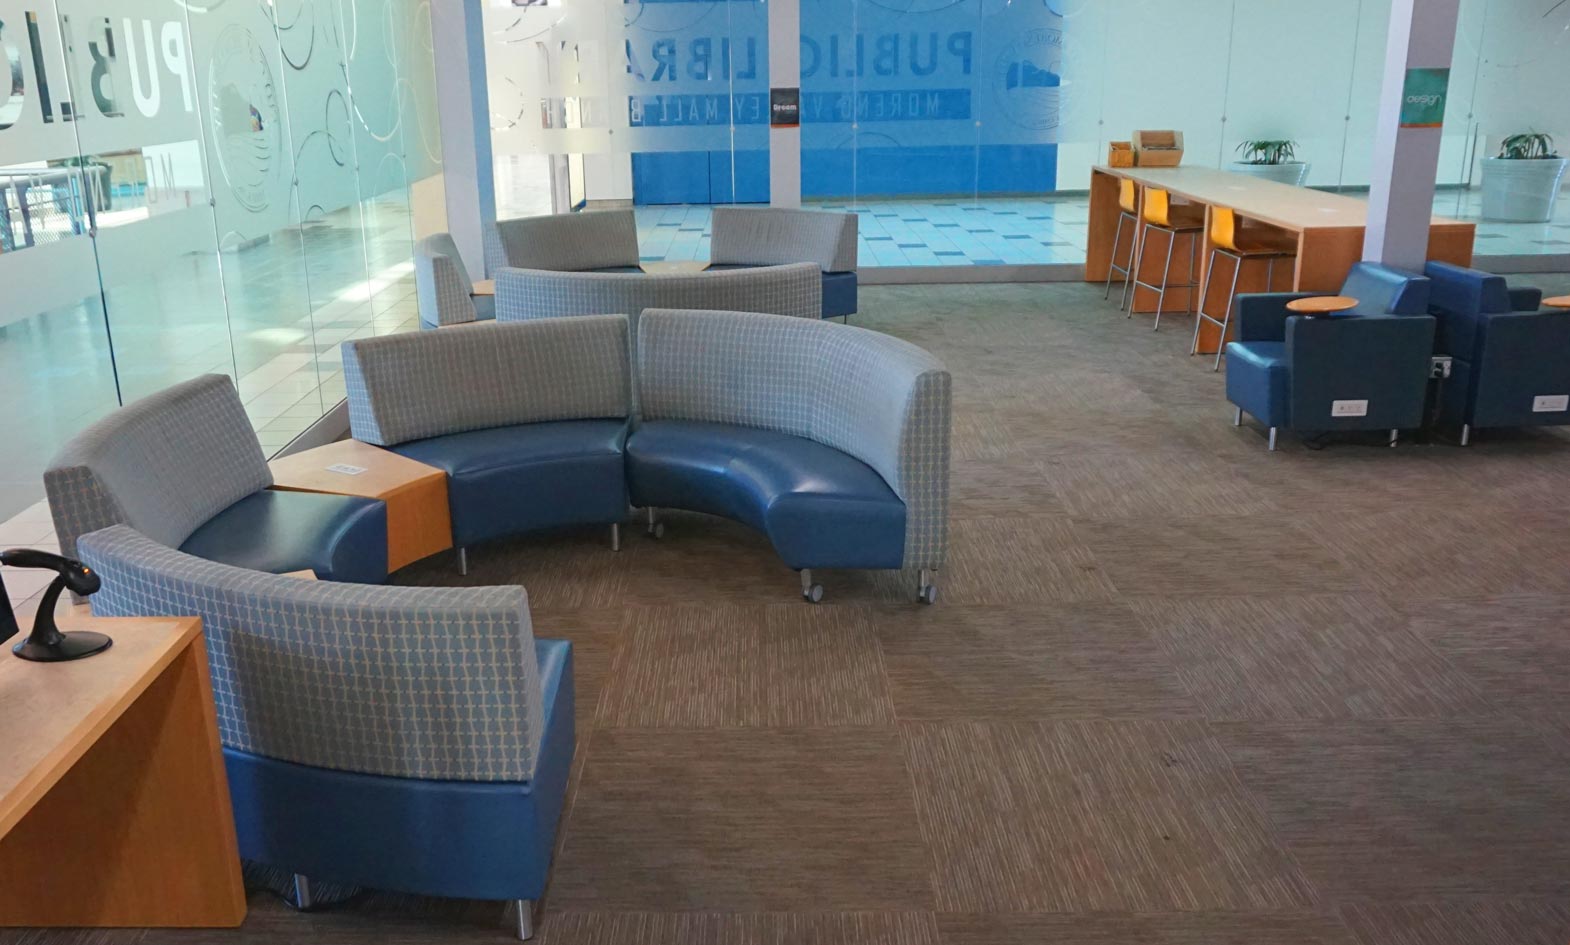 Public Library furniture with curved lounge seating, lounge chairs with tablet arms and large café height wood table